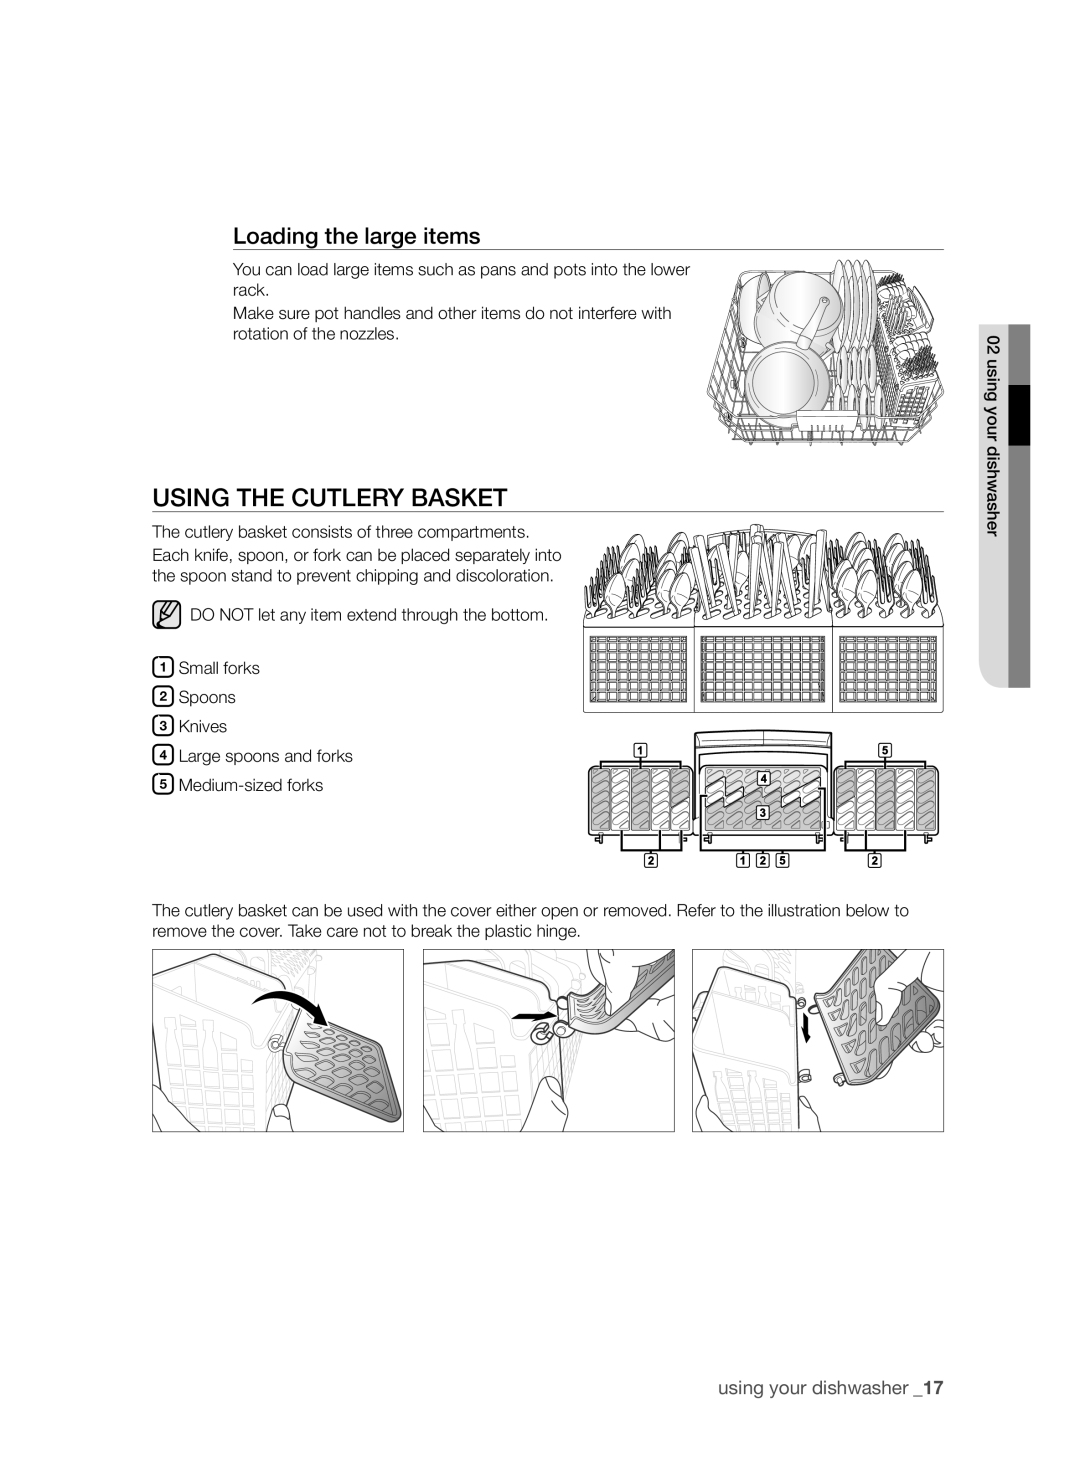 Samsung DMR57LHB, DMR57LHS, DMR57LHW user manual Using the cutlery basket, Loading the large items, using your dishwasher 